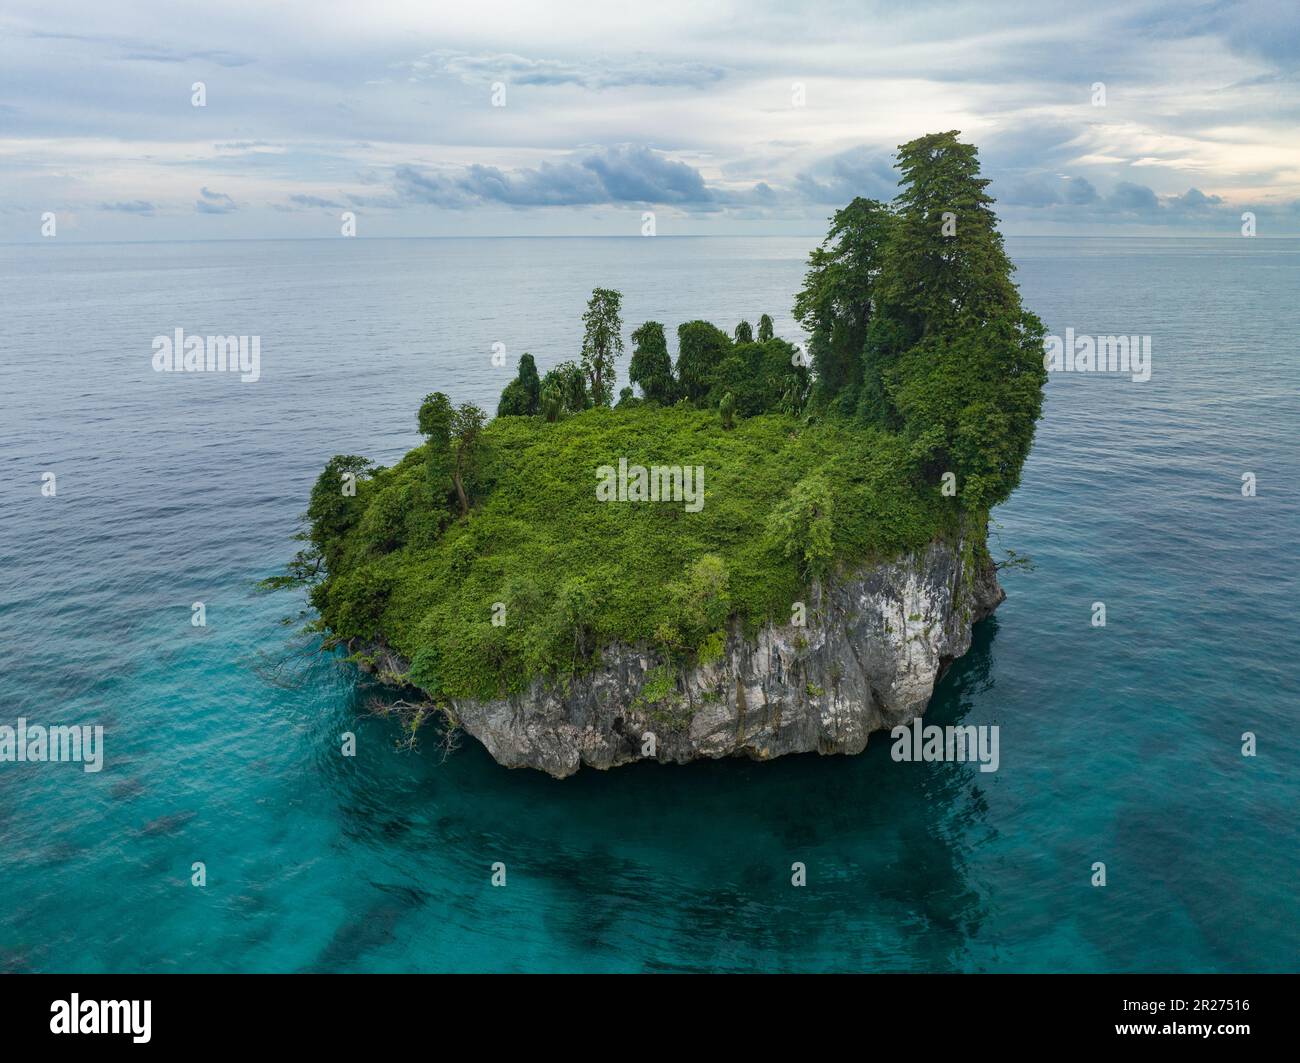 A lone limestone island, covered by vegetation, rises from West Papua's seascape. This remote part of Indonesia is known for its high biodiversity. Stock Photo